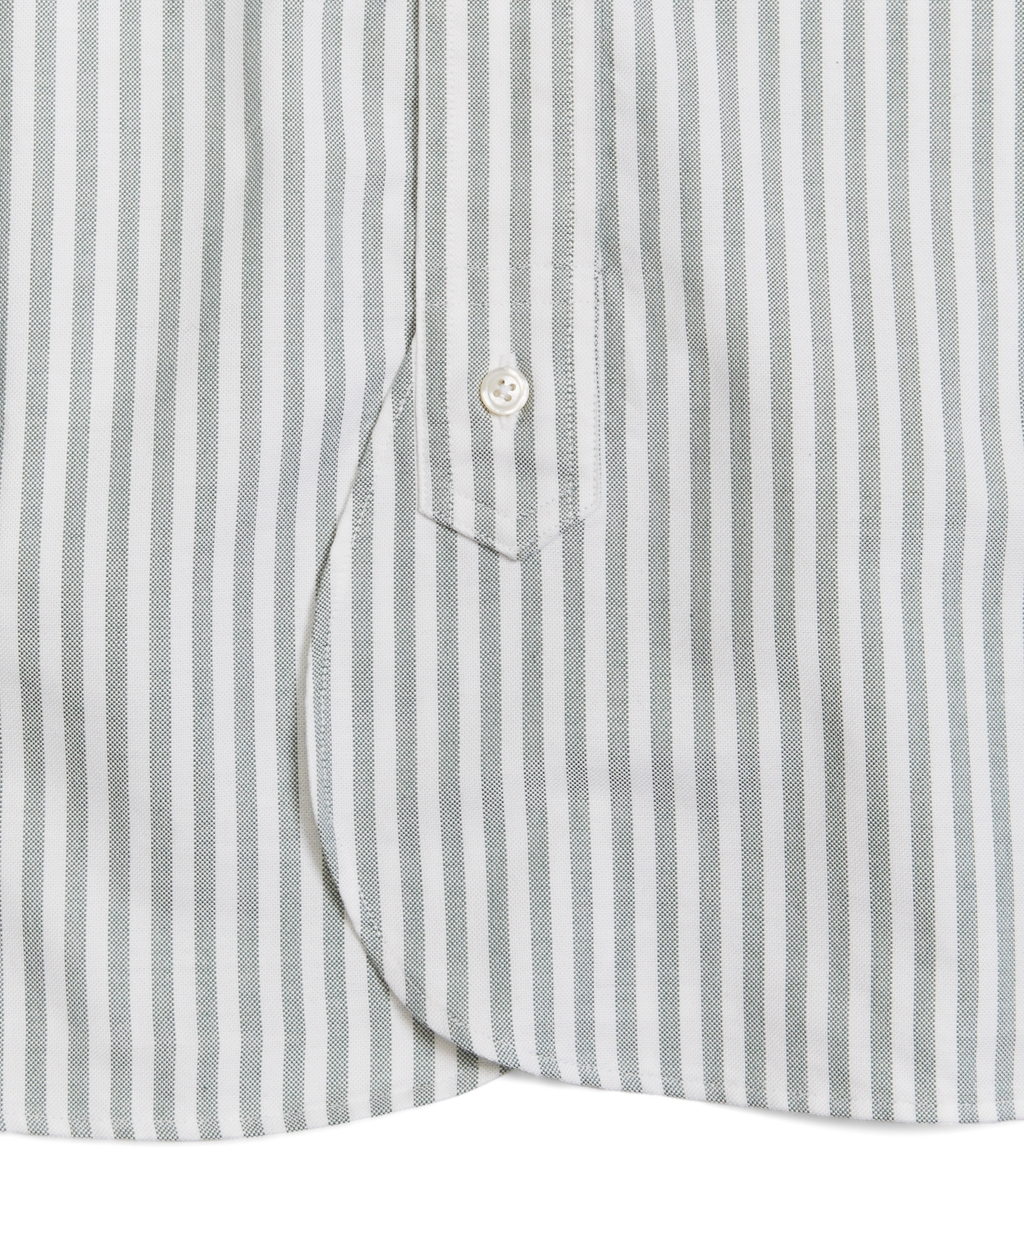 brooks-brothers-green-white-white-and-green-striped-button-down-shirt-product-1-399060357-normal.jpeg